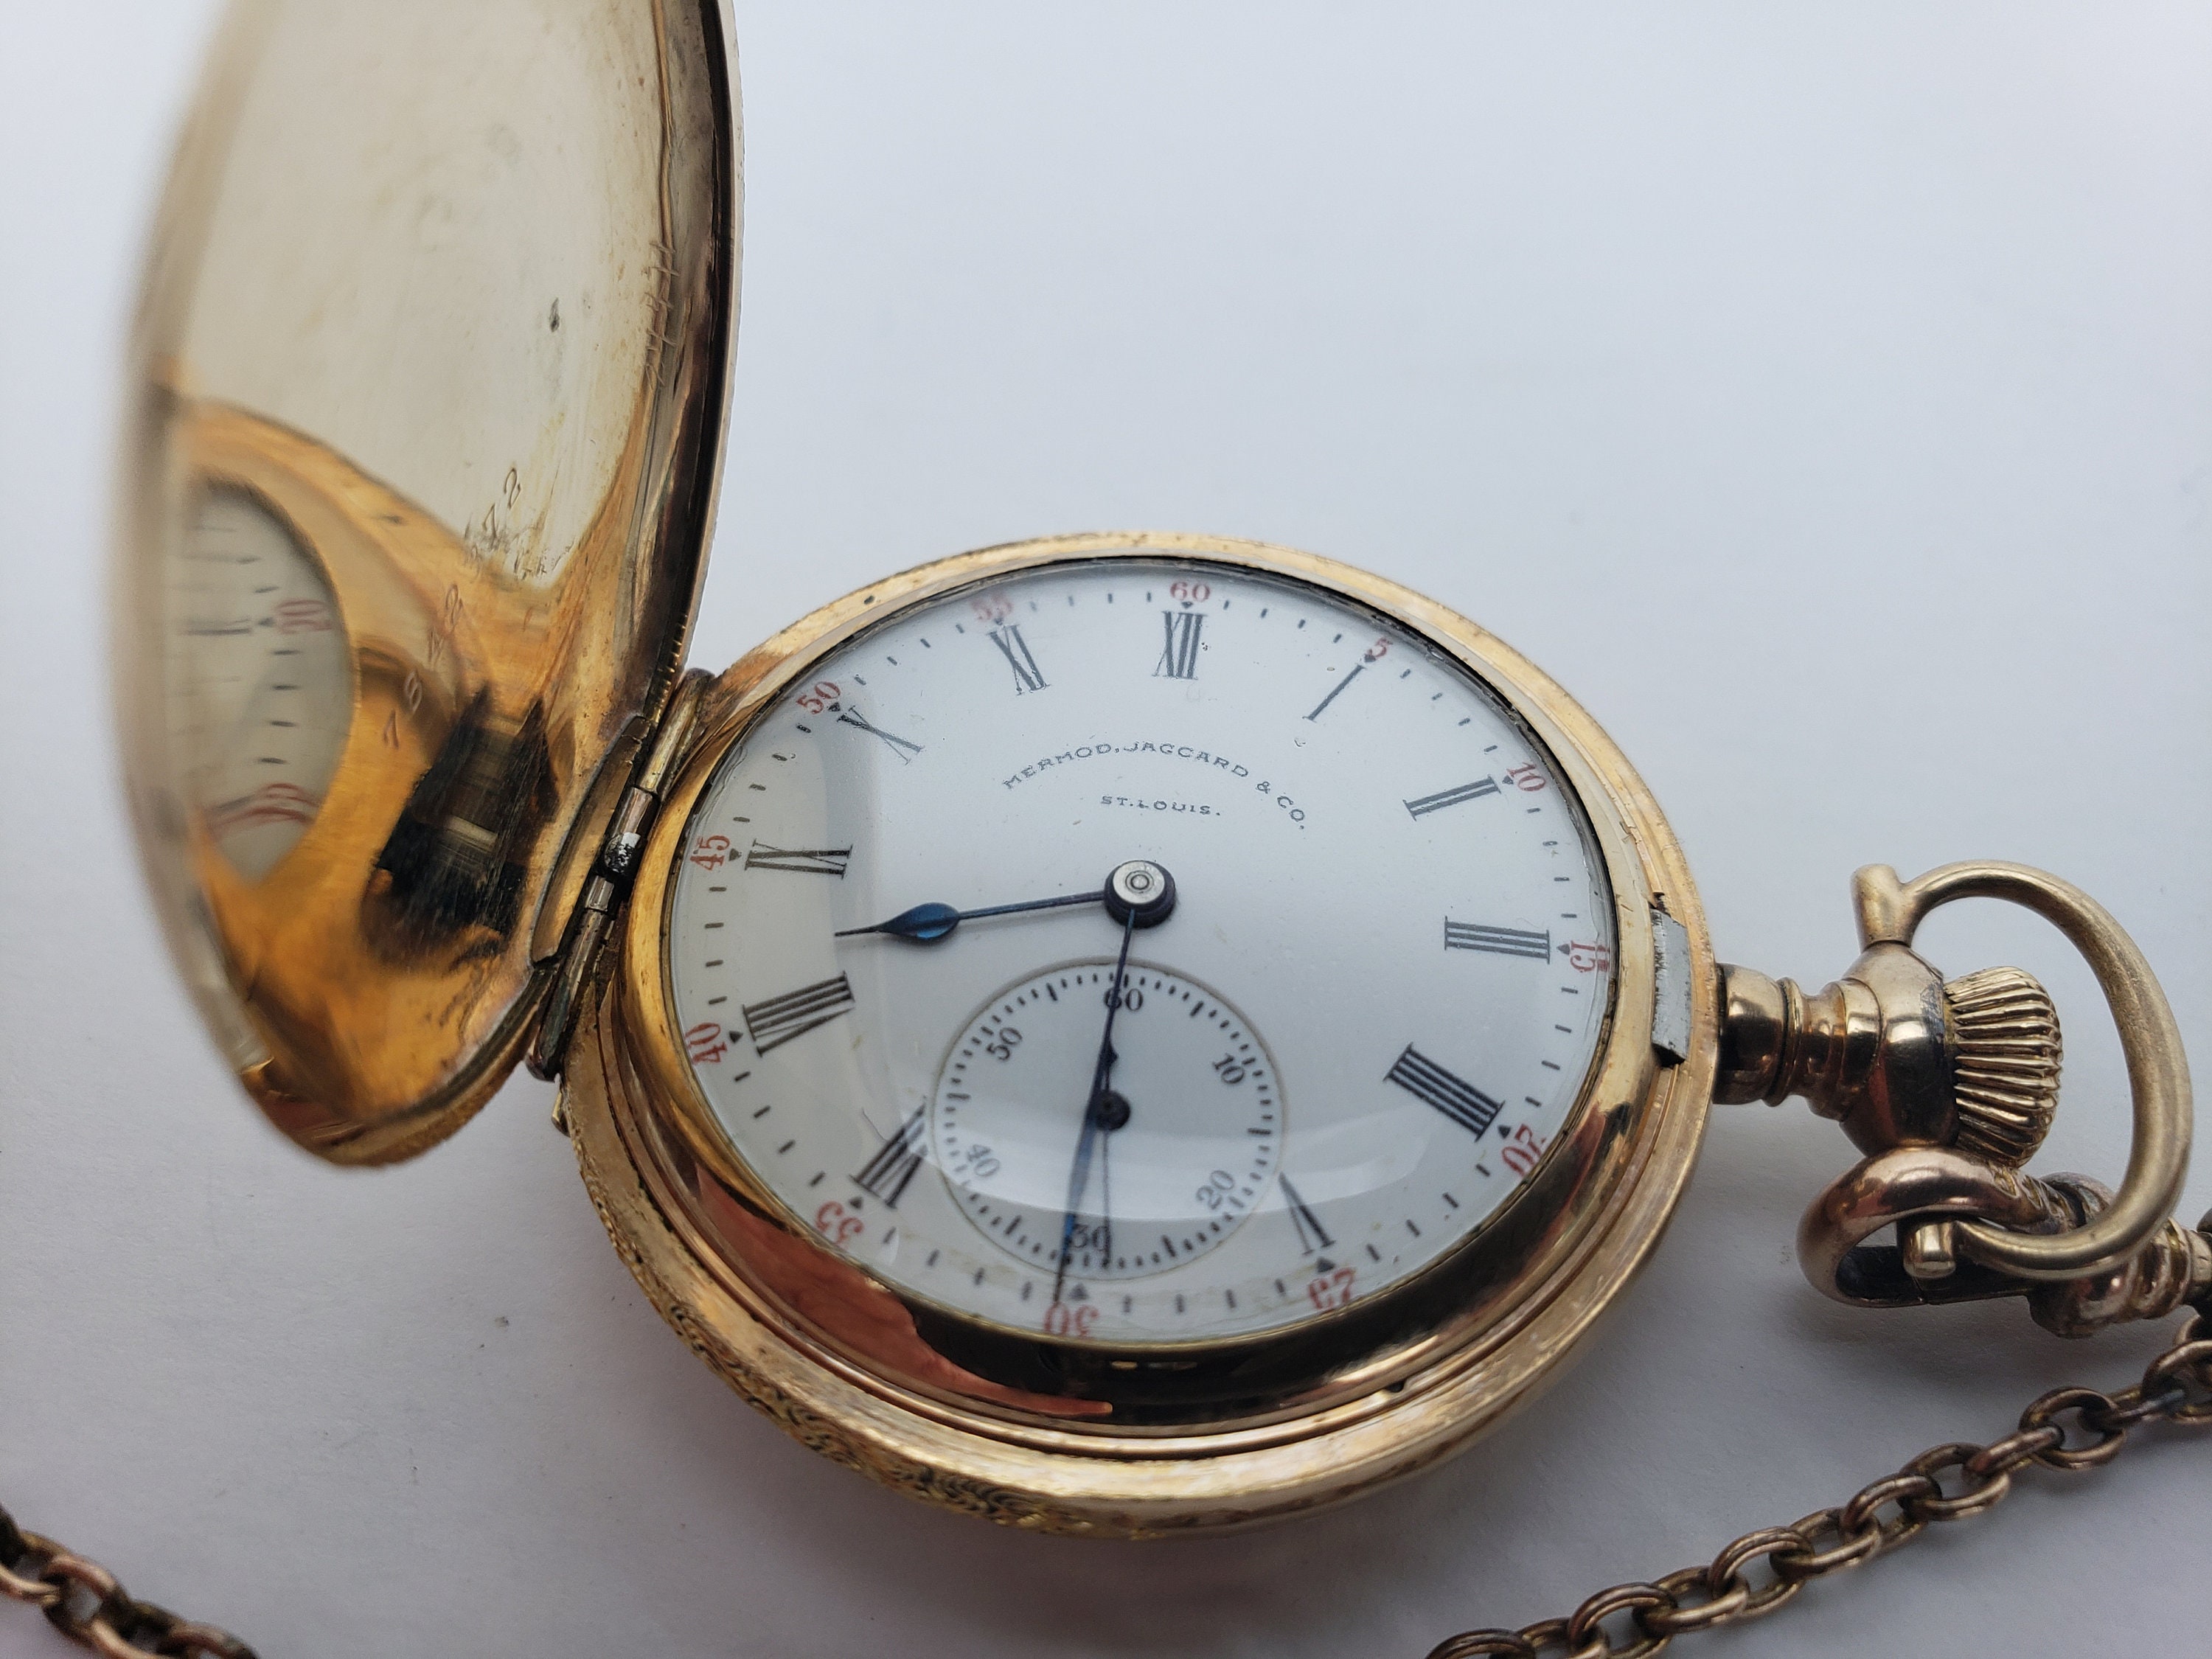 Antique Mermod Jaccard Pocket Watch Woman's 1800's St. - Etsy